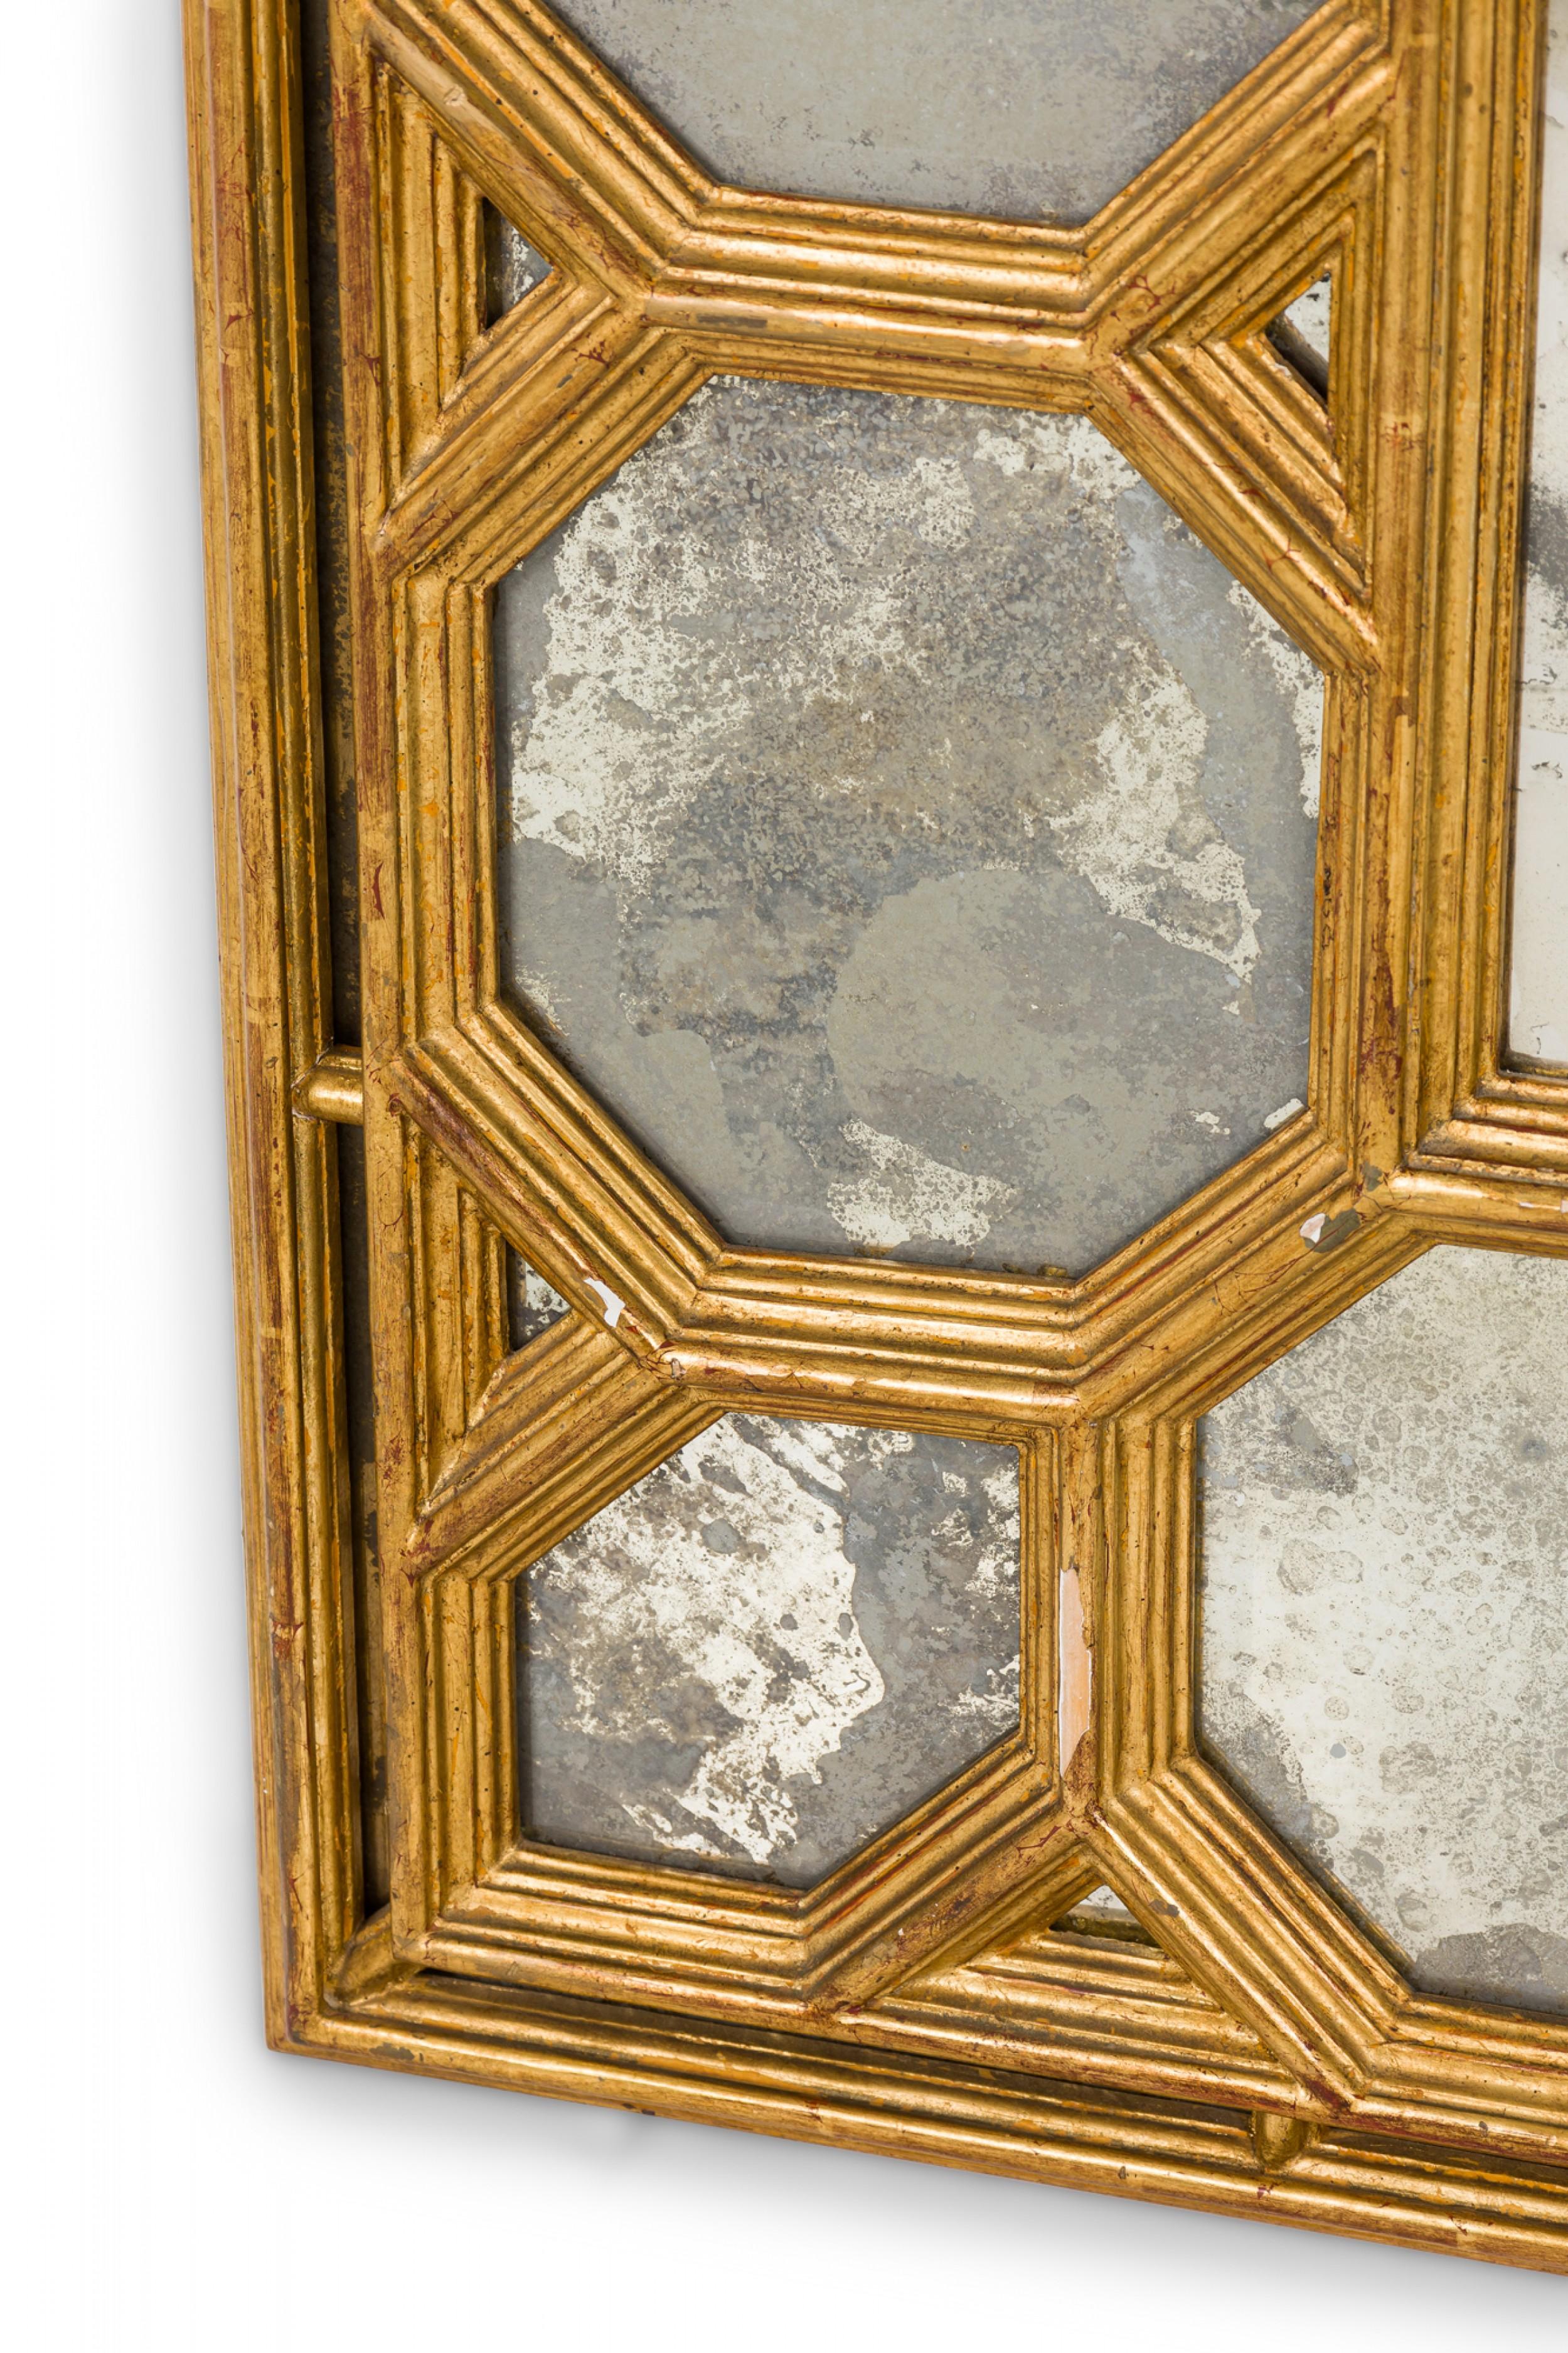 Mid-Century American Hollywood Regency-style rectangular wall mirror featuring inset giltwood geometric circle shaped mirrors framing a central rectangular mirror (Prov: Estate of Michael Taylor).